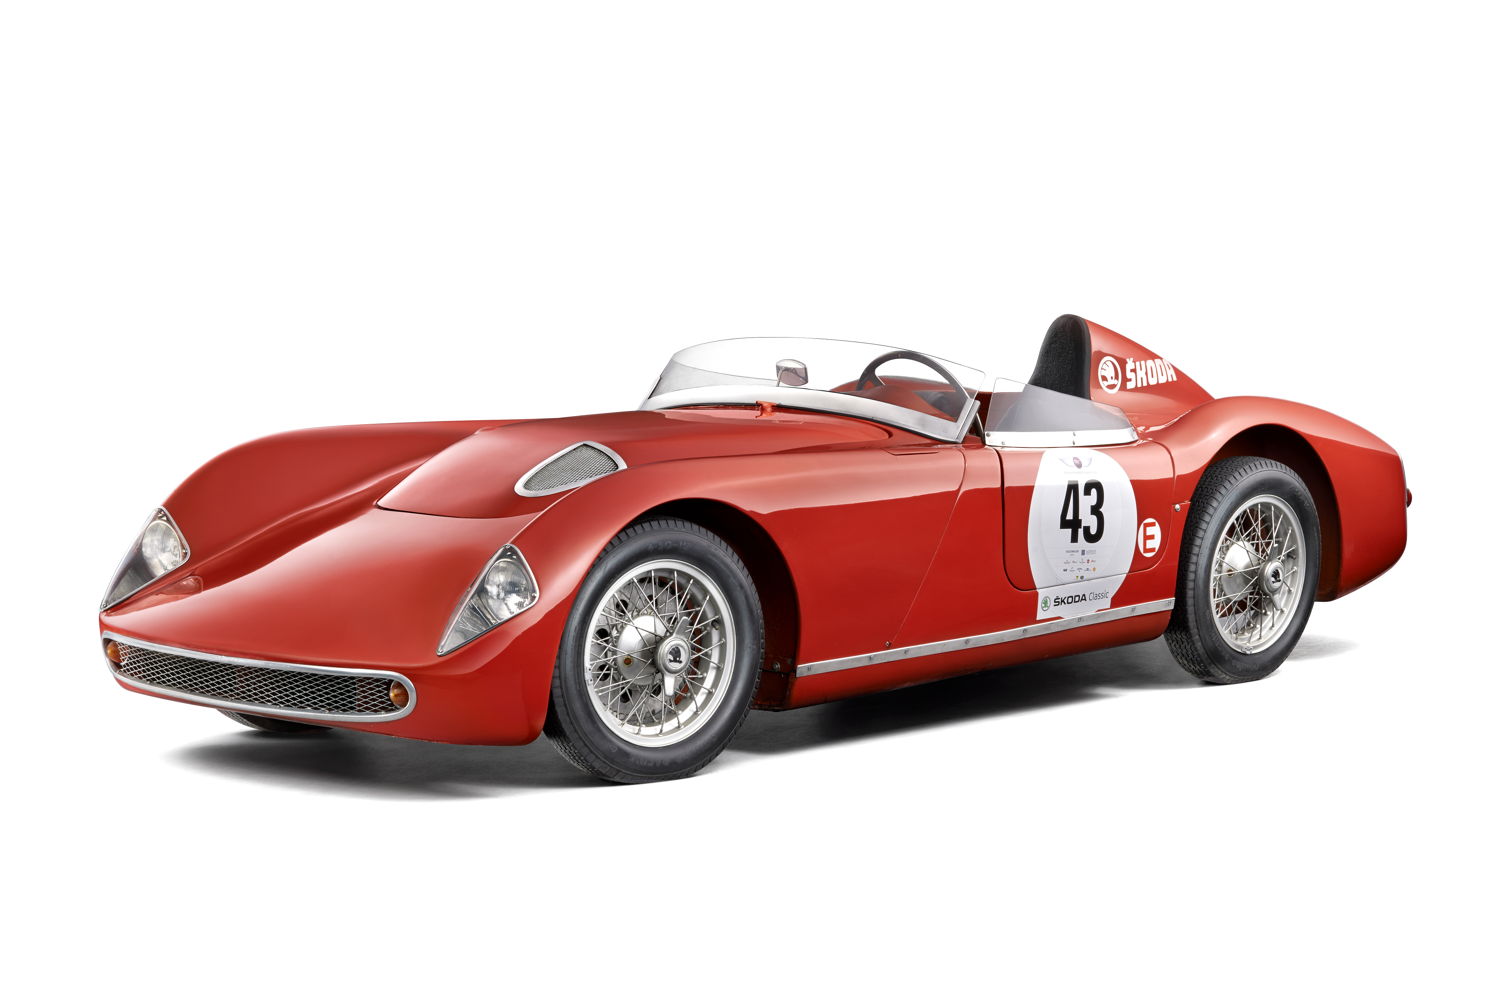 By December 1957, two units of the open-top racing car ŠKODA 1100 OHC, with a top speed of 200 km/h had been built.